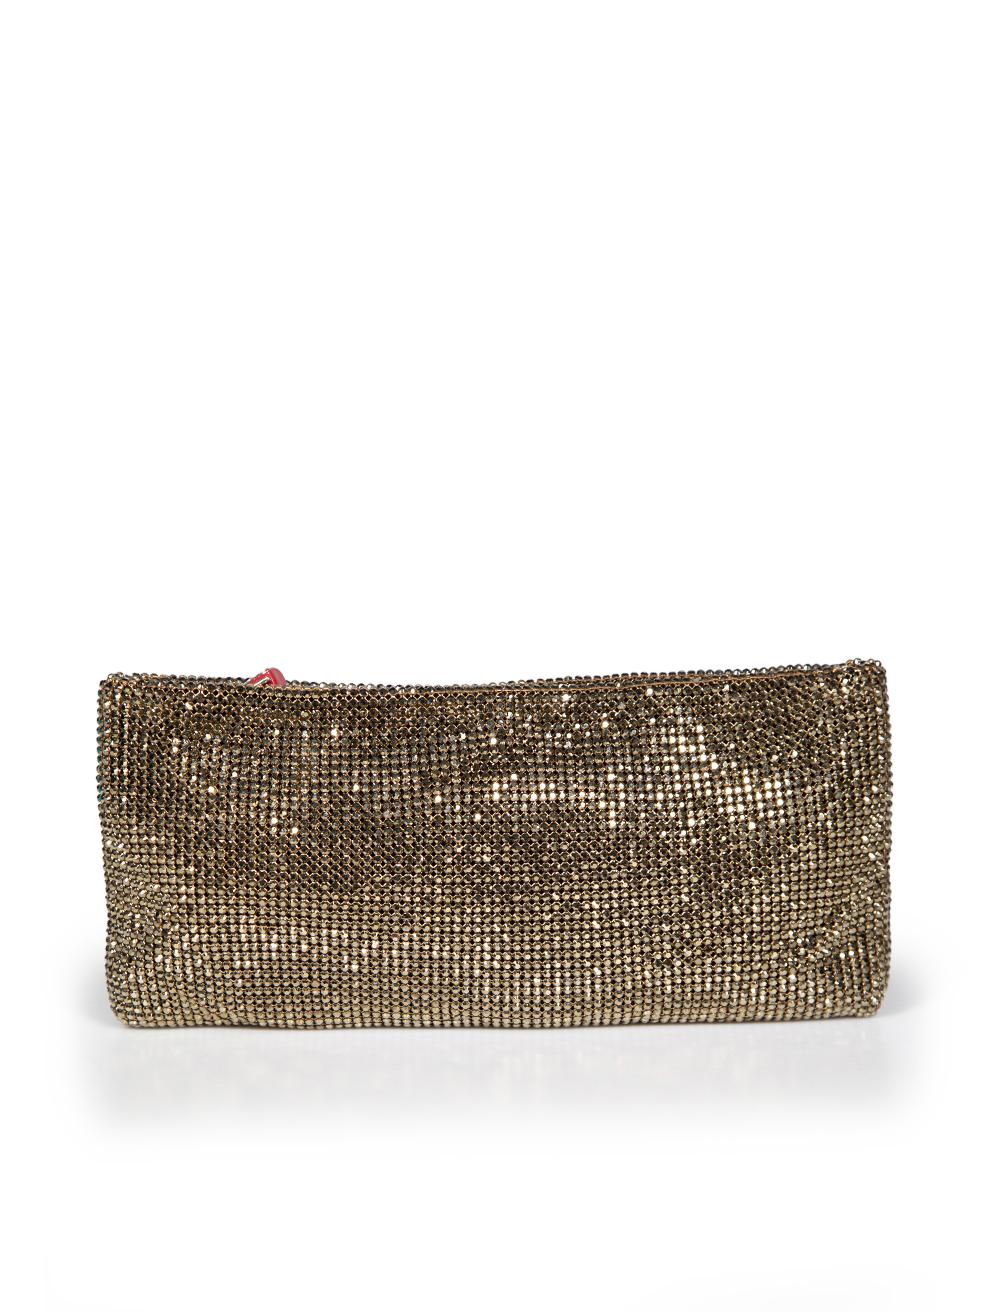 Christian Louboutin Gold Metal Glitter Maikimai Clutch Bag In Excellent Condition For Sale In London, GB